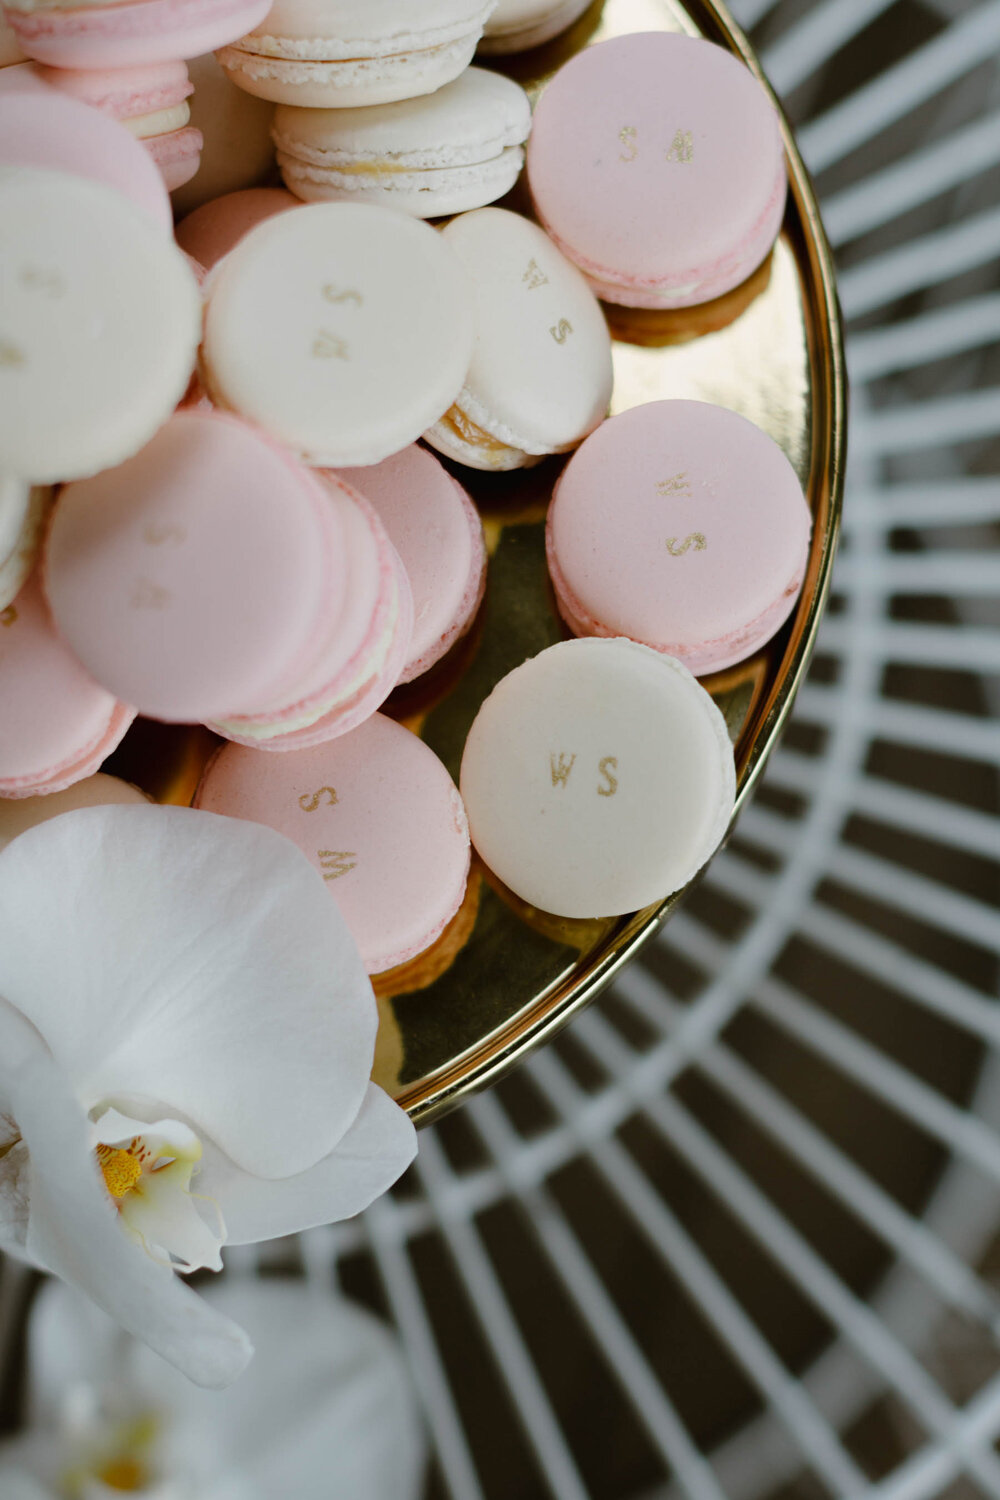 Utterly delicious ‘Wedding Series’ monogrammed macarons created by Byron Bay Cake Boutique